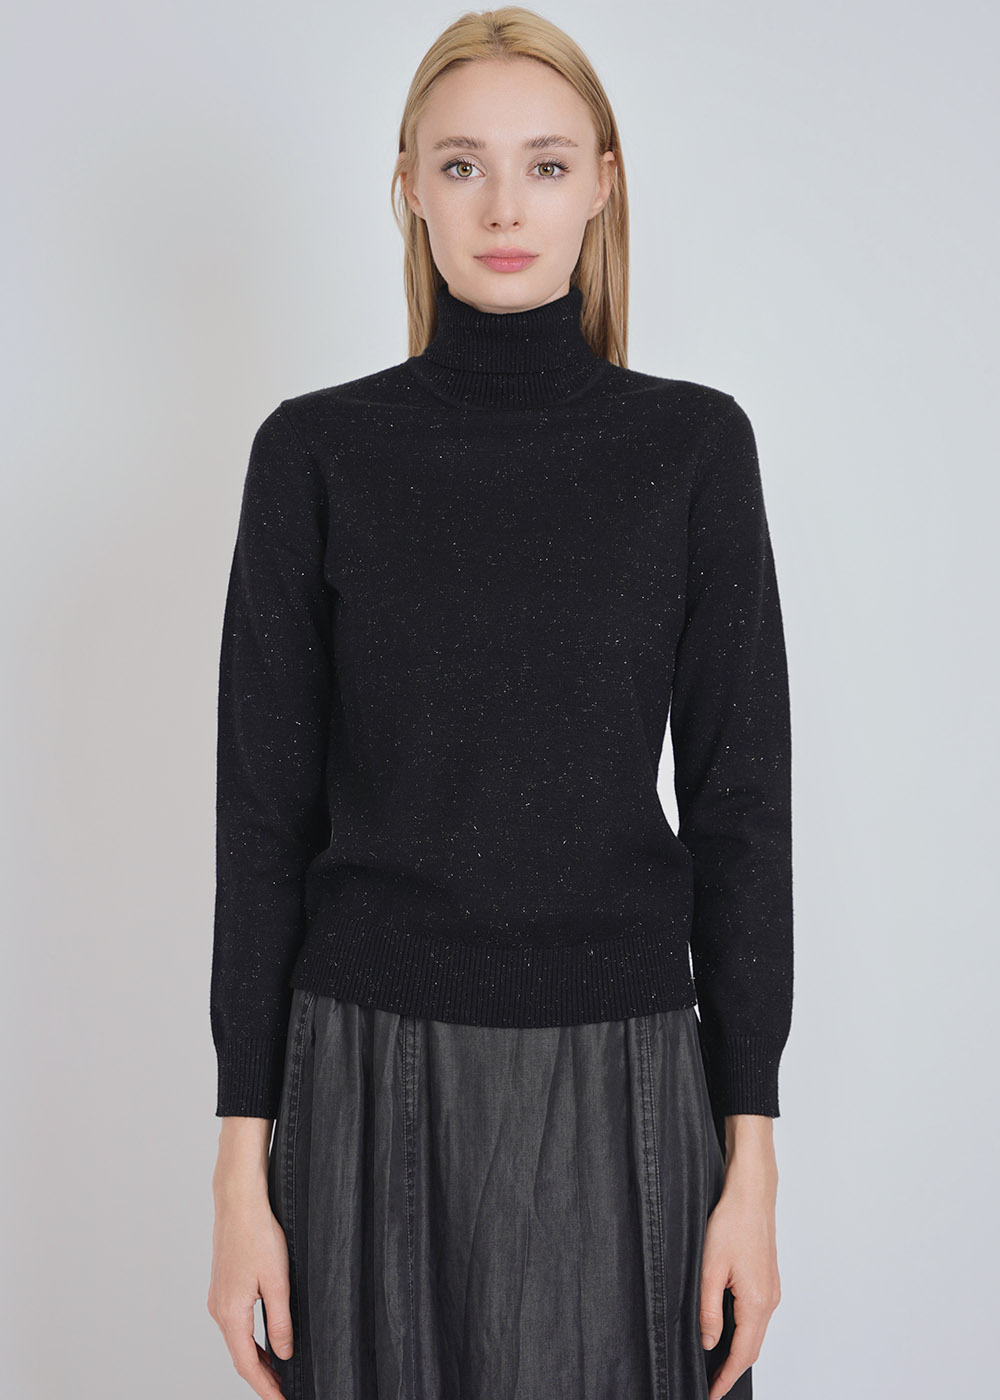 Starry Night: Black Knit Sweater with High Neck